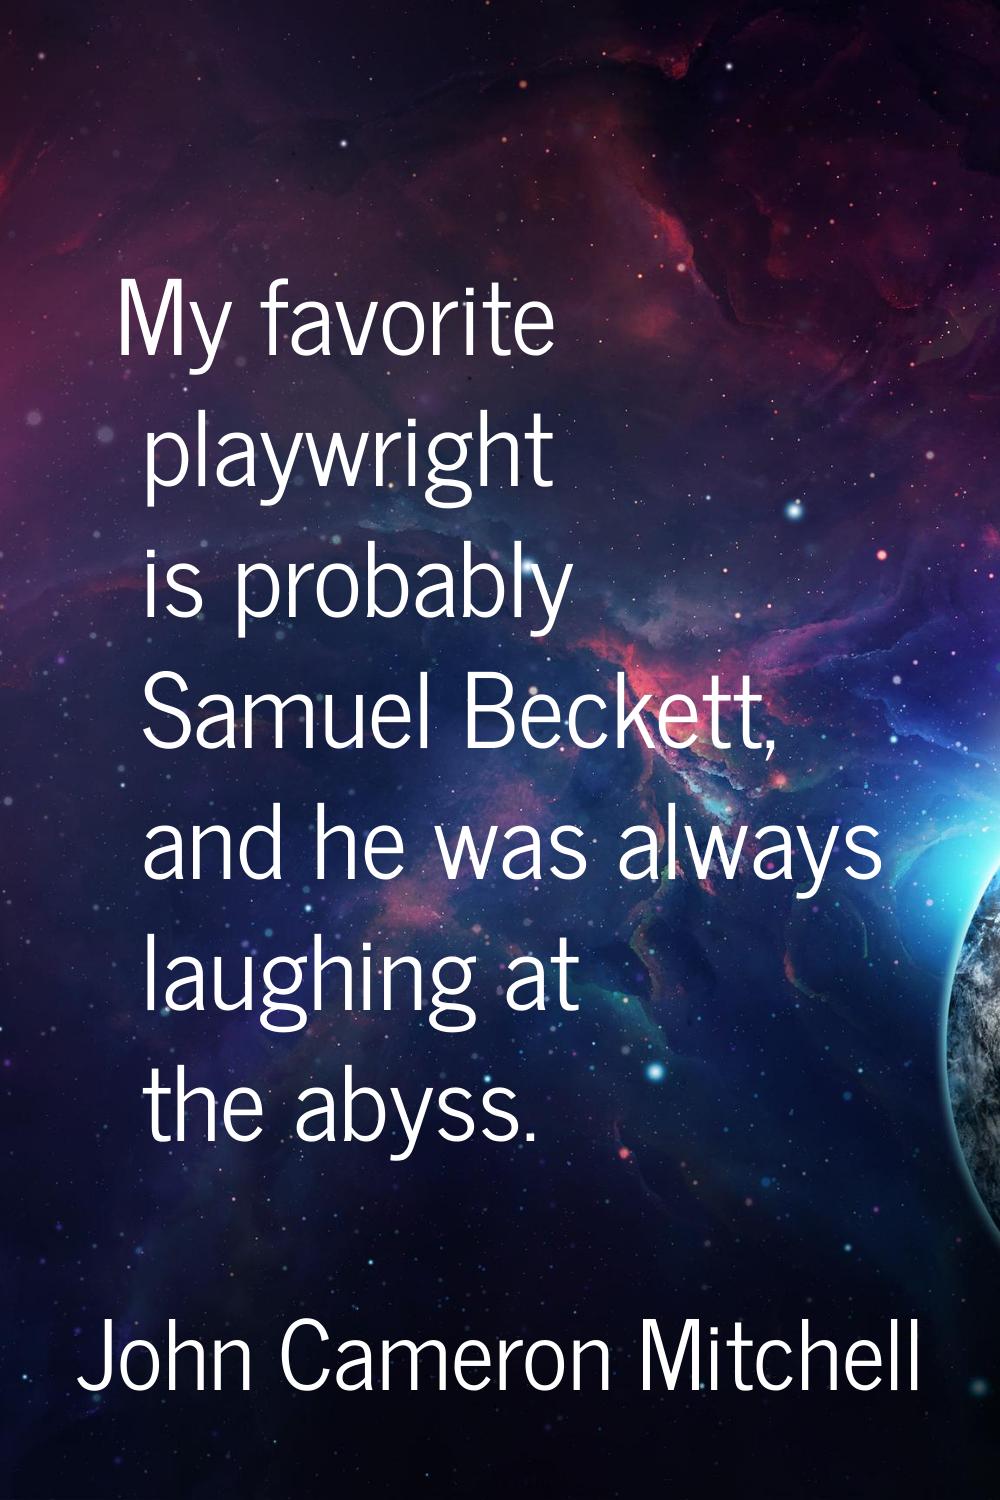 My favorite playwright is probably Samuel Beckett, and he was always laughing at the abyss.